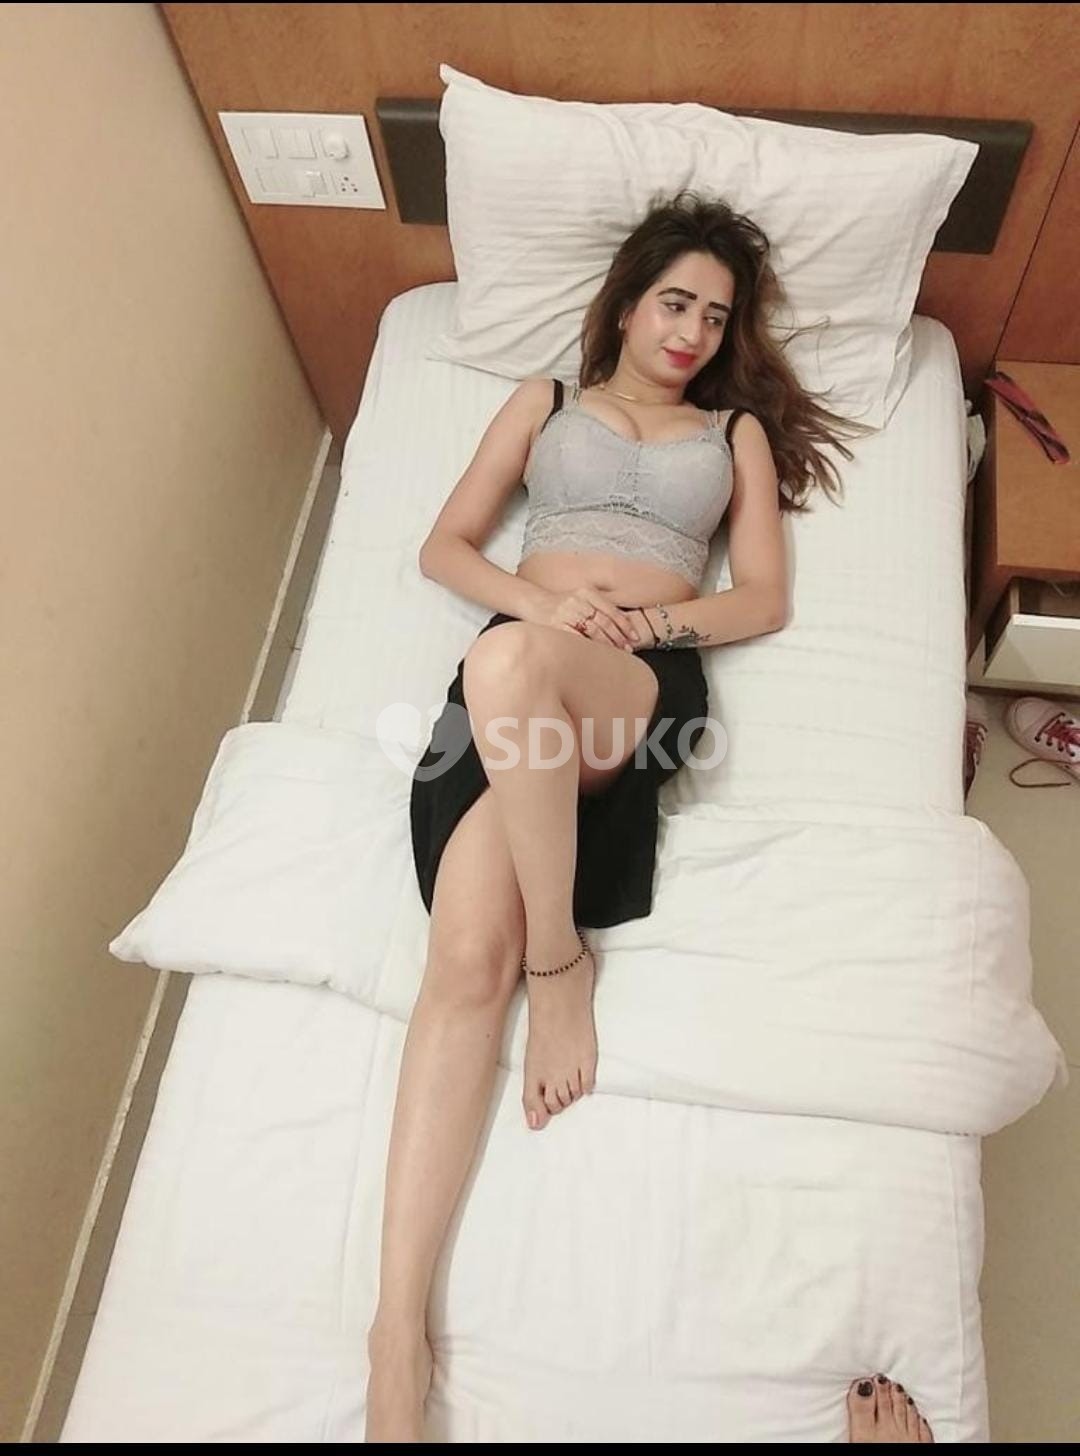 Ameerpet, Call Girl service available in low budget with room facility